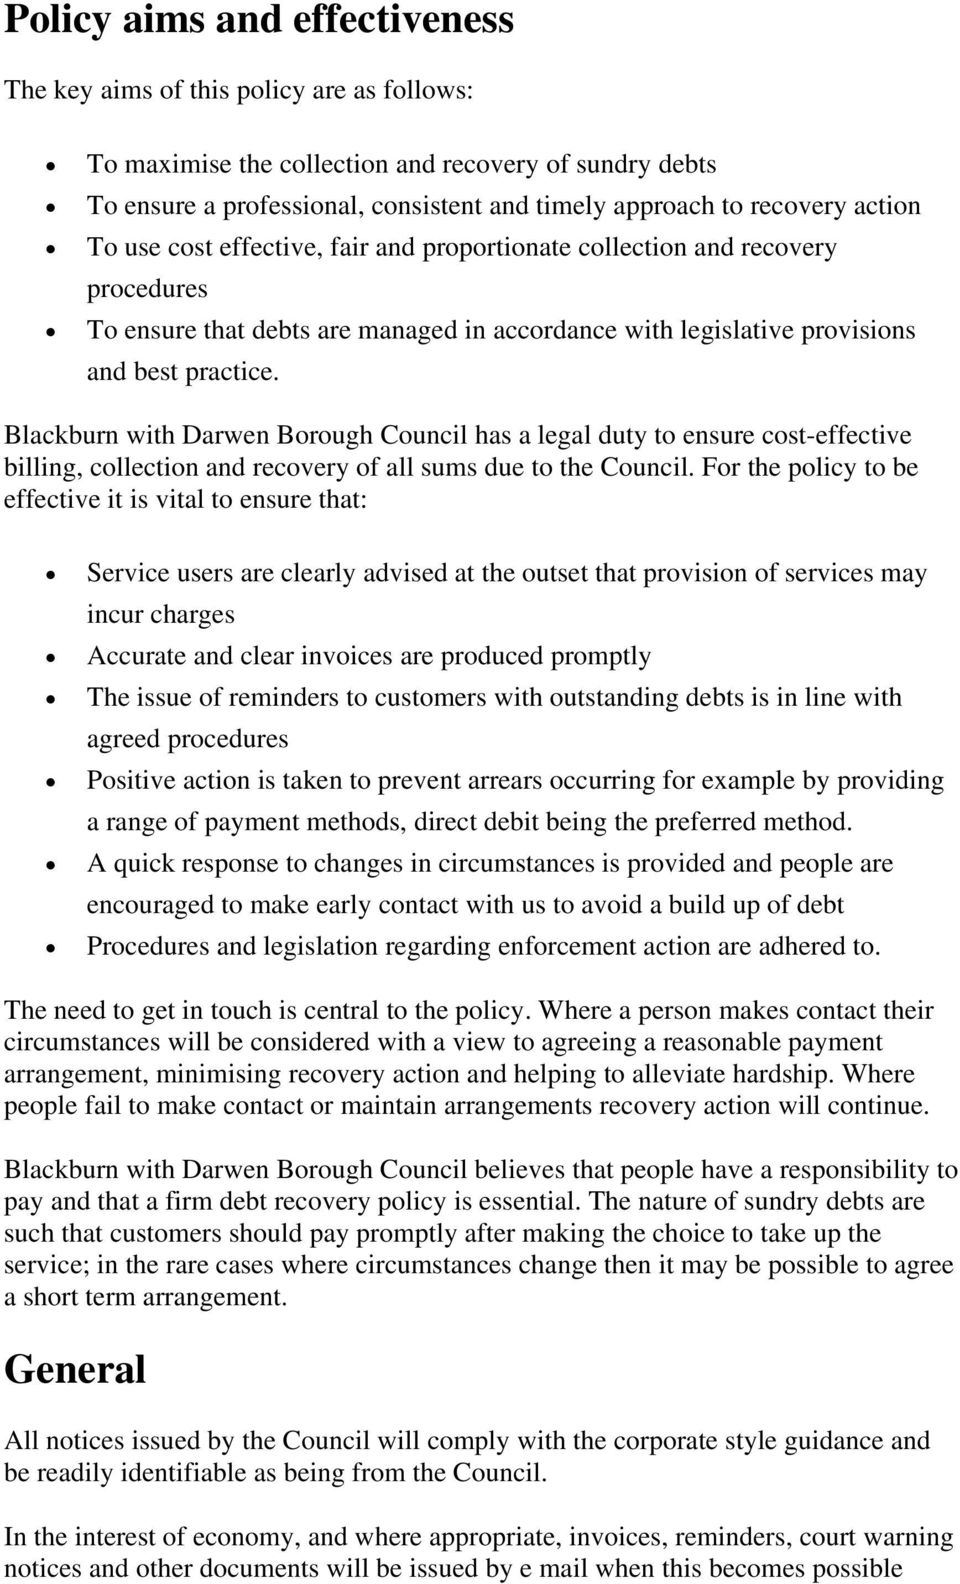 Blackburn with Darwen Borough Council has a legal duty to ensure cost-effective billing, collection and recovery of all sums due to the Council.